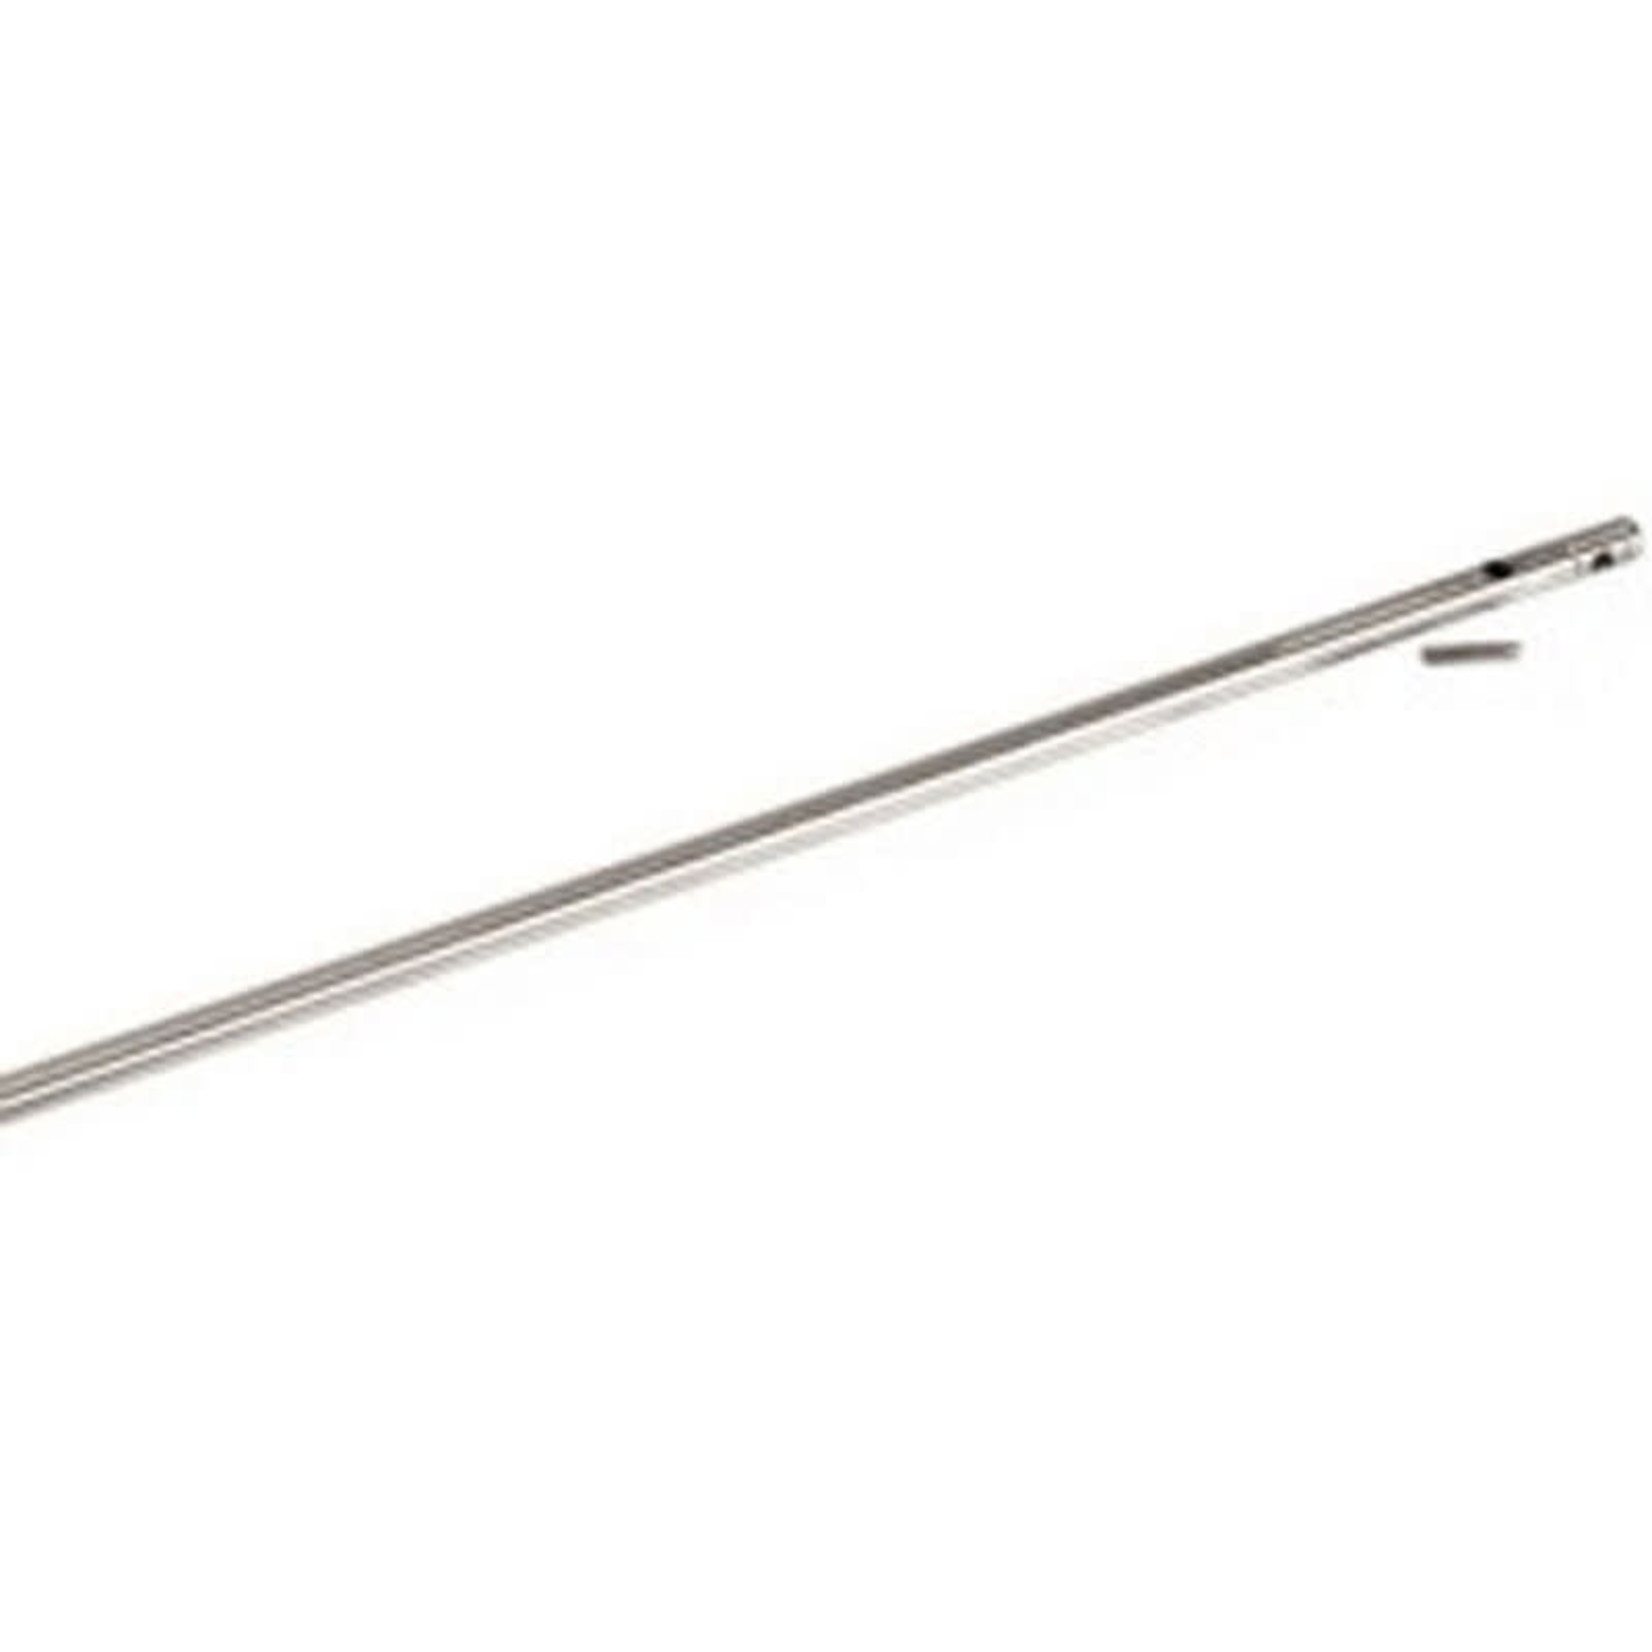 AR15/M16 GAS TUBE (STAINLESS STELL-SILVER COLOR) 11 3/4"